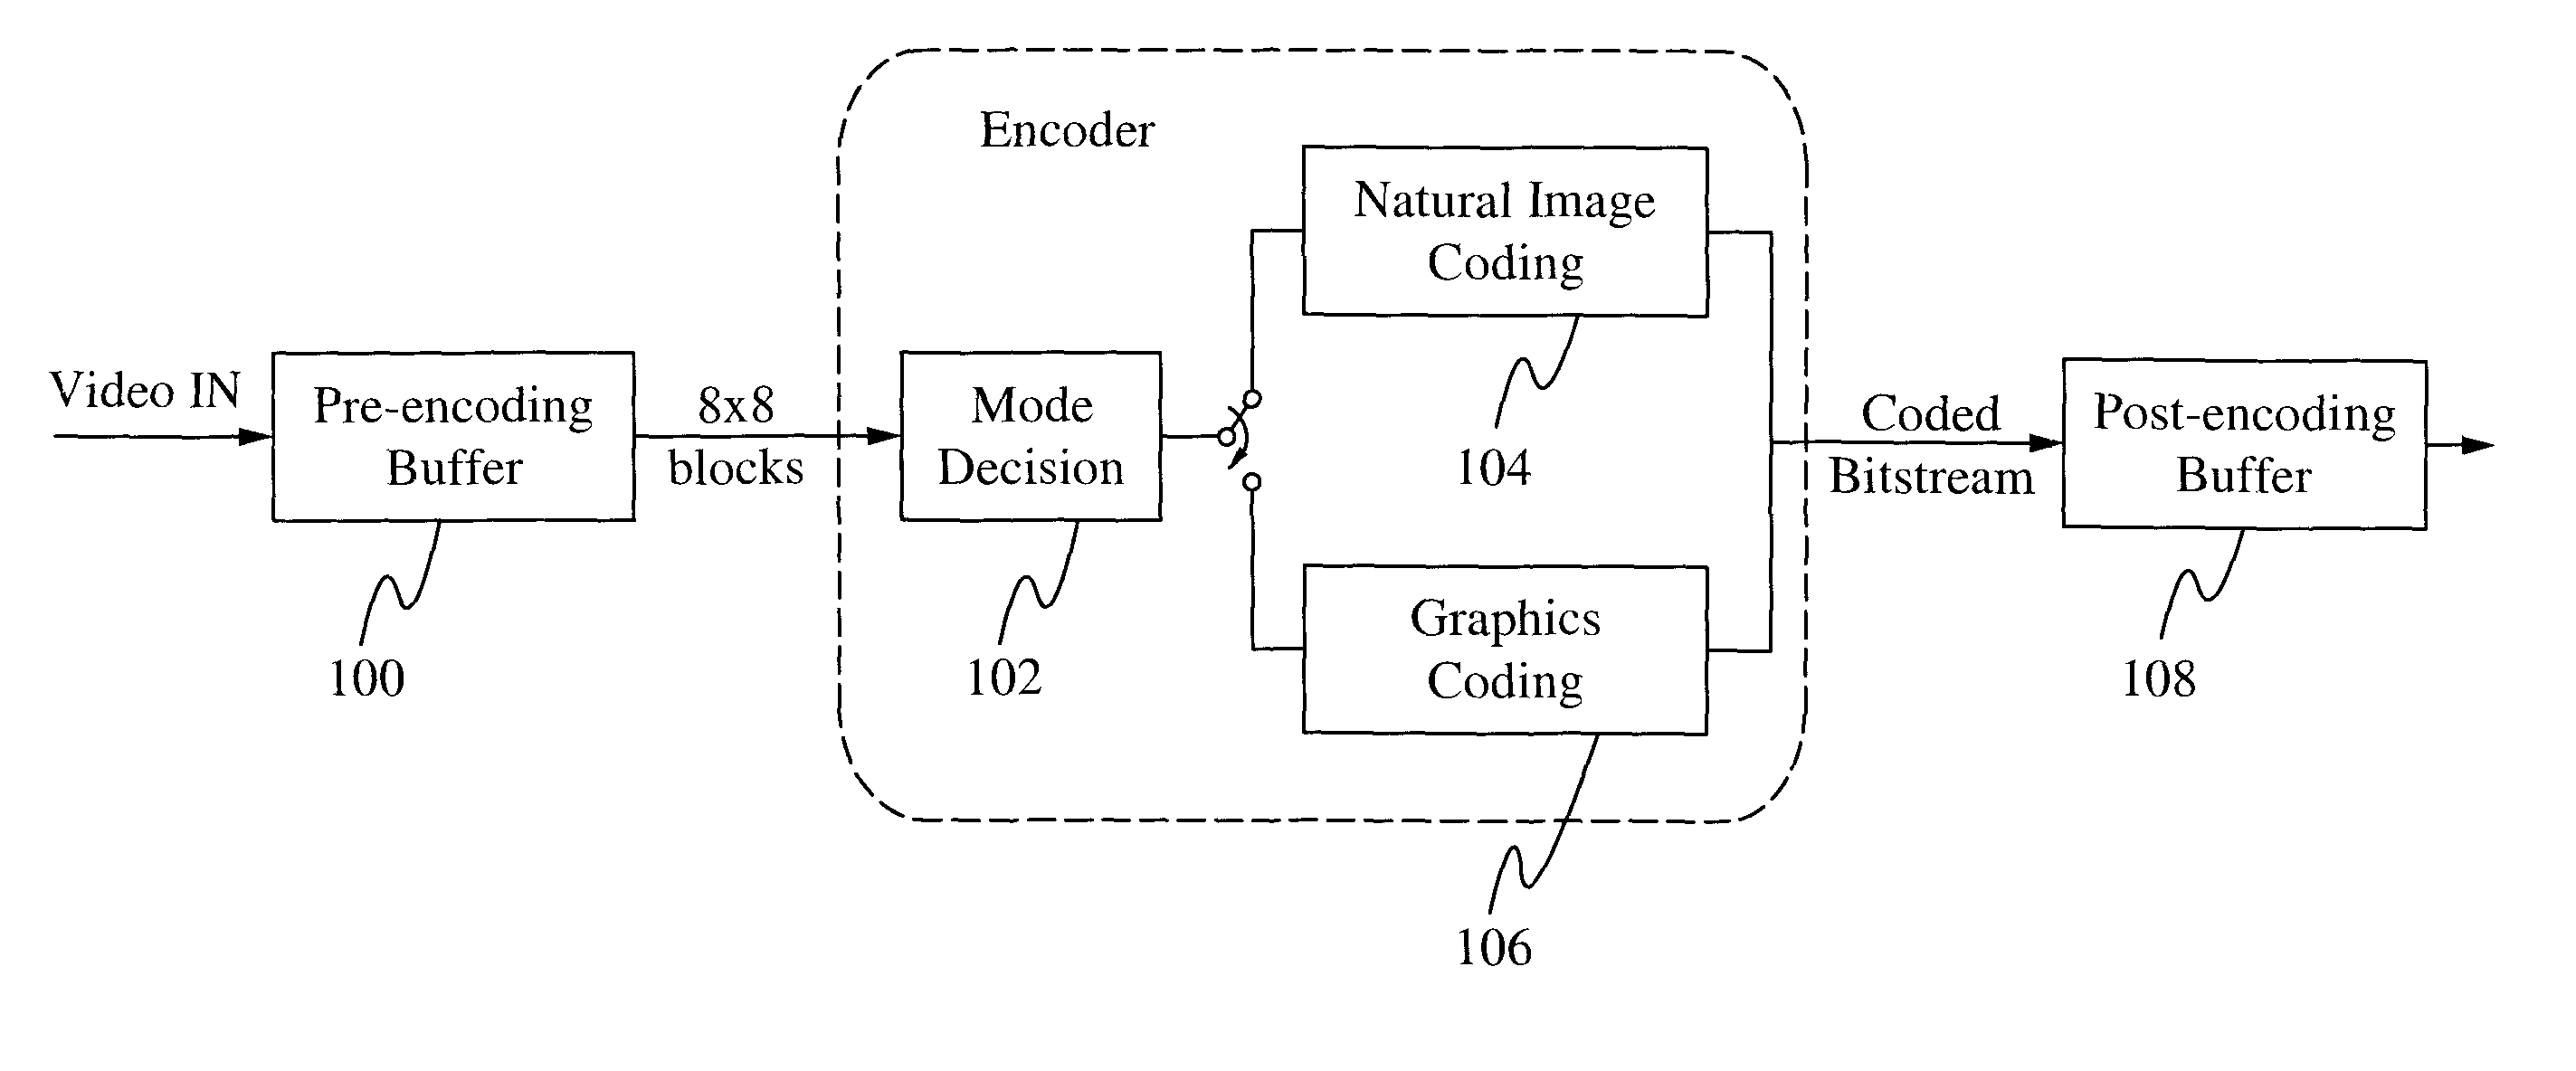 Dual-mode compression of images and videos for reliable real-time transmission